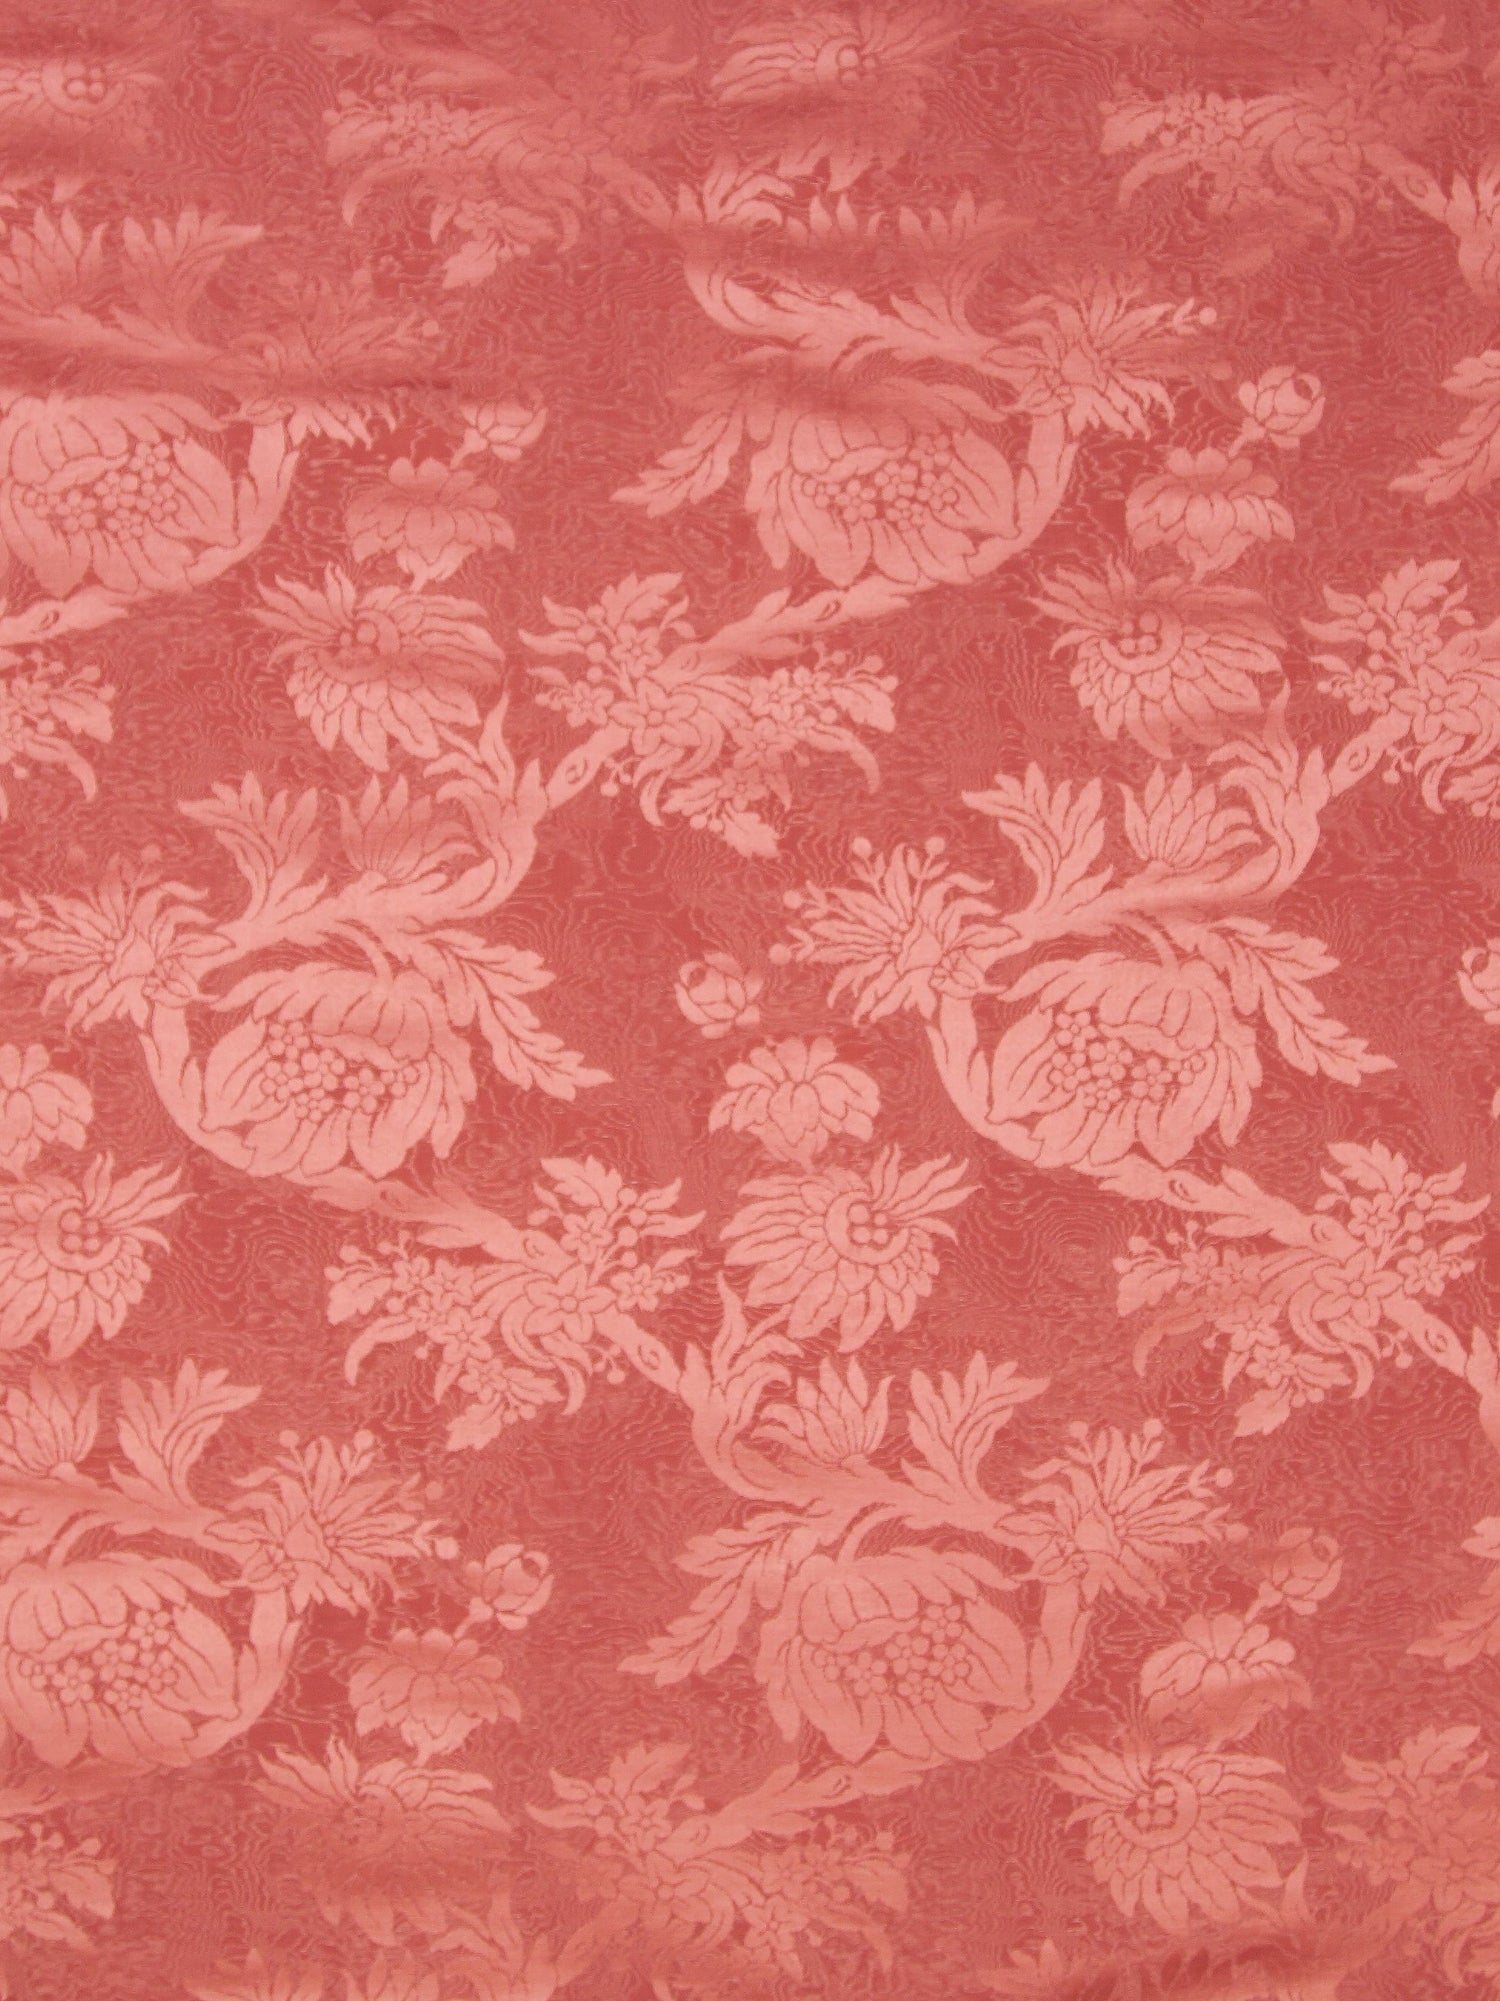 Damas Parc Monceau fabric in coral color - pattern number SC 000326695 - by Scalamandre in the Scalamandre Fabrics Book 1 collection